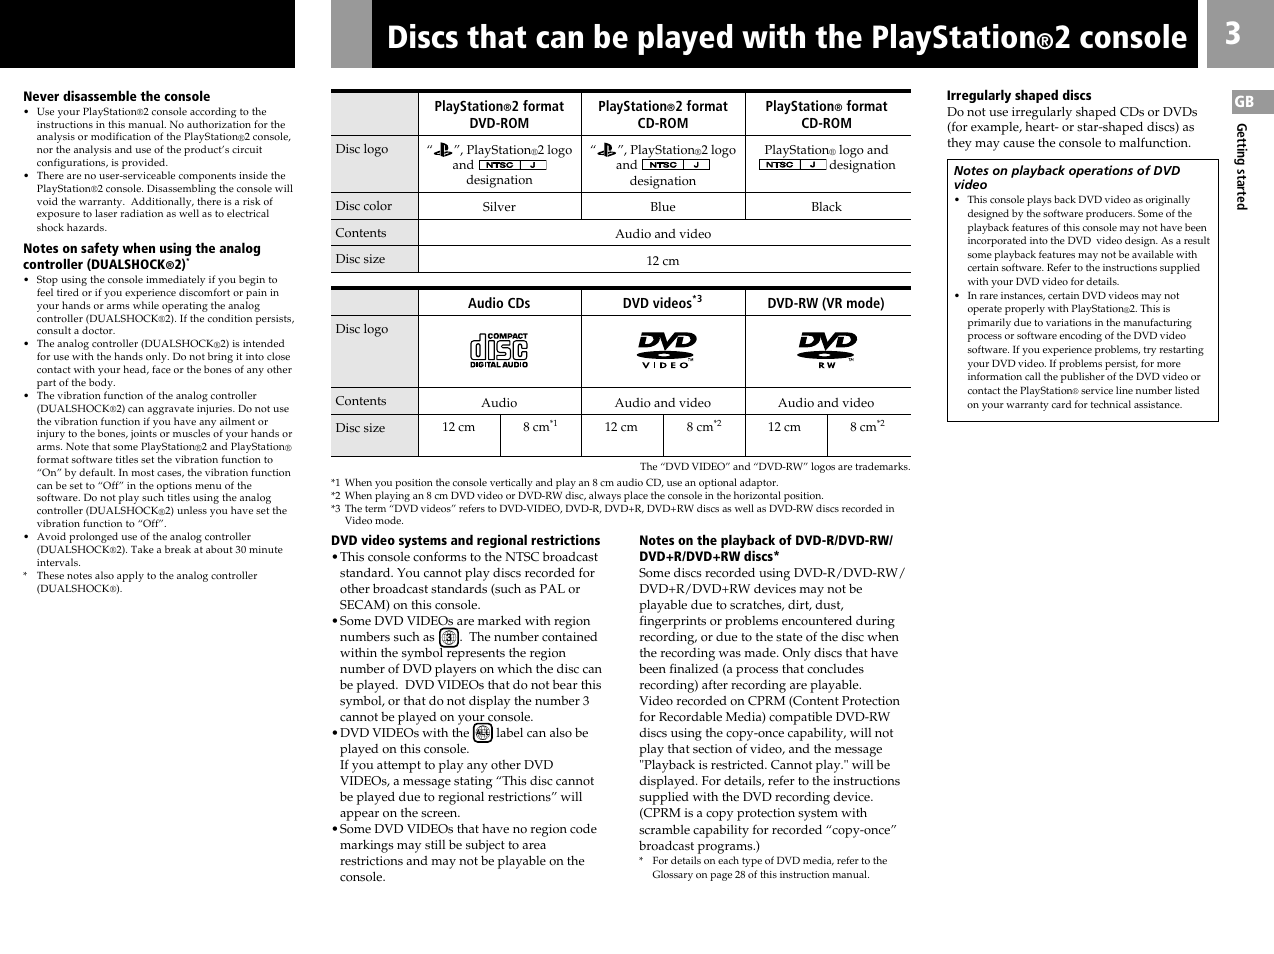 Discs that can be played with the playstation, 2 console | Sony SCPH-50006 User Manual | Page 3 / 56